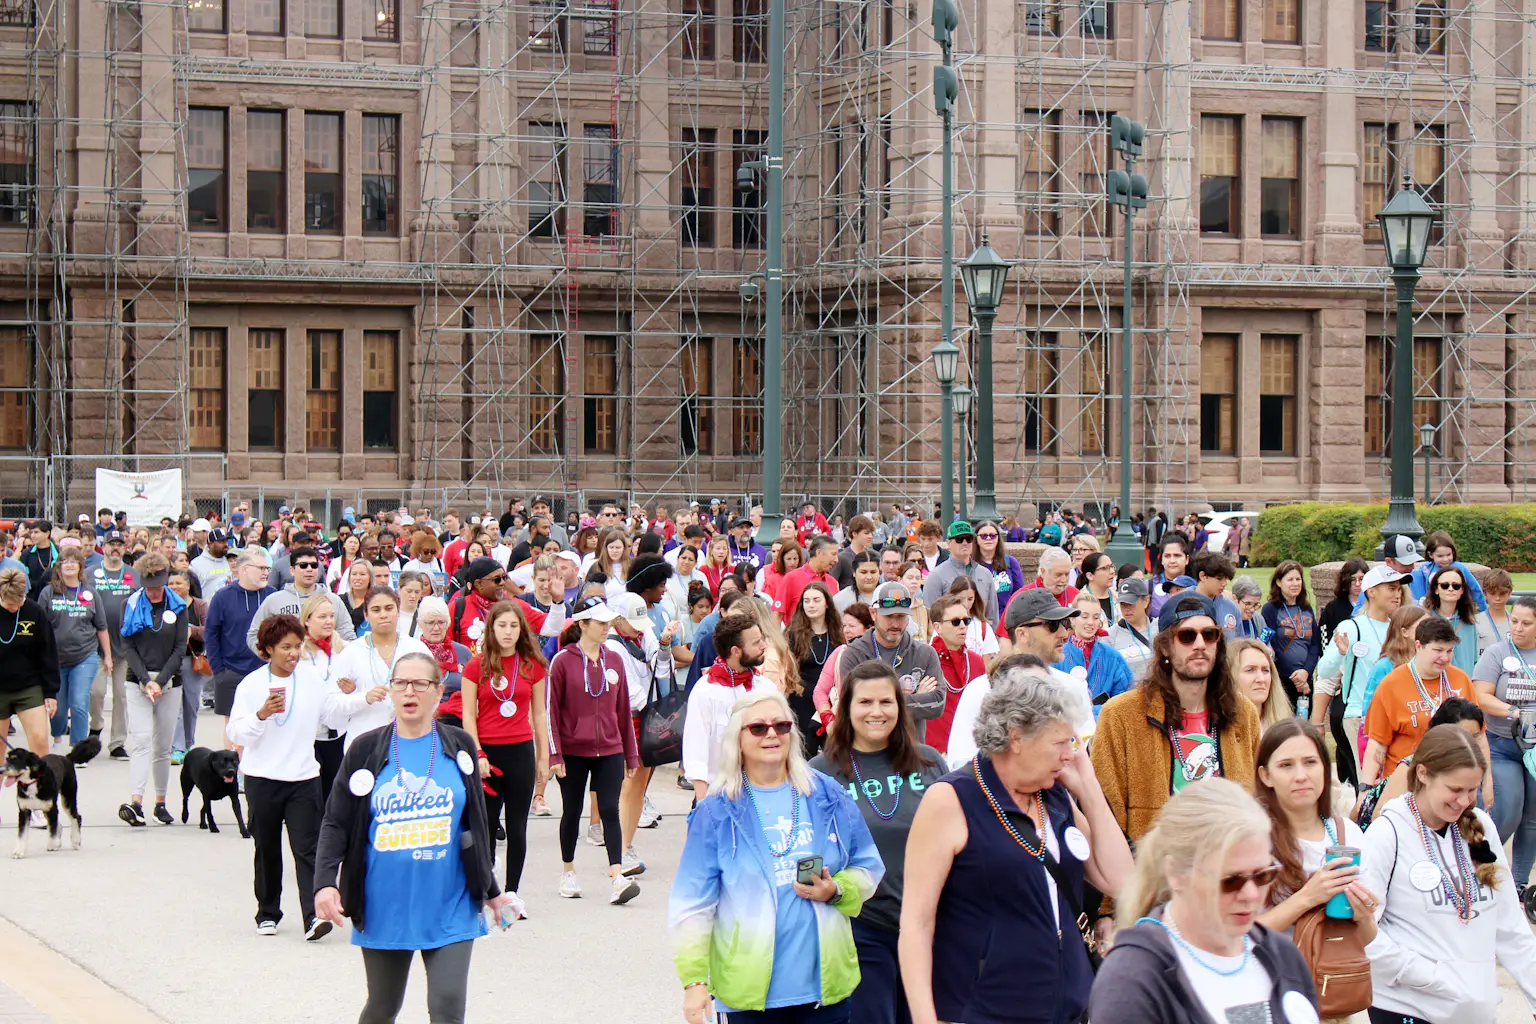 1,000+ people walking at the state capitol for suicide prevention